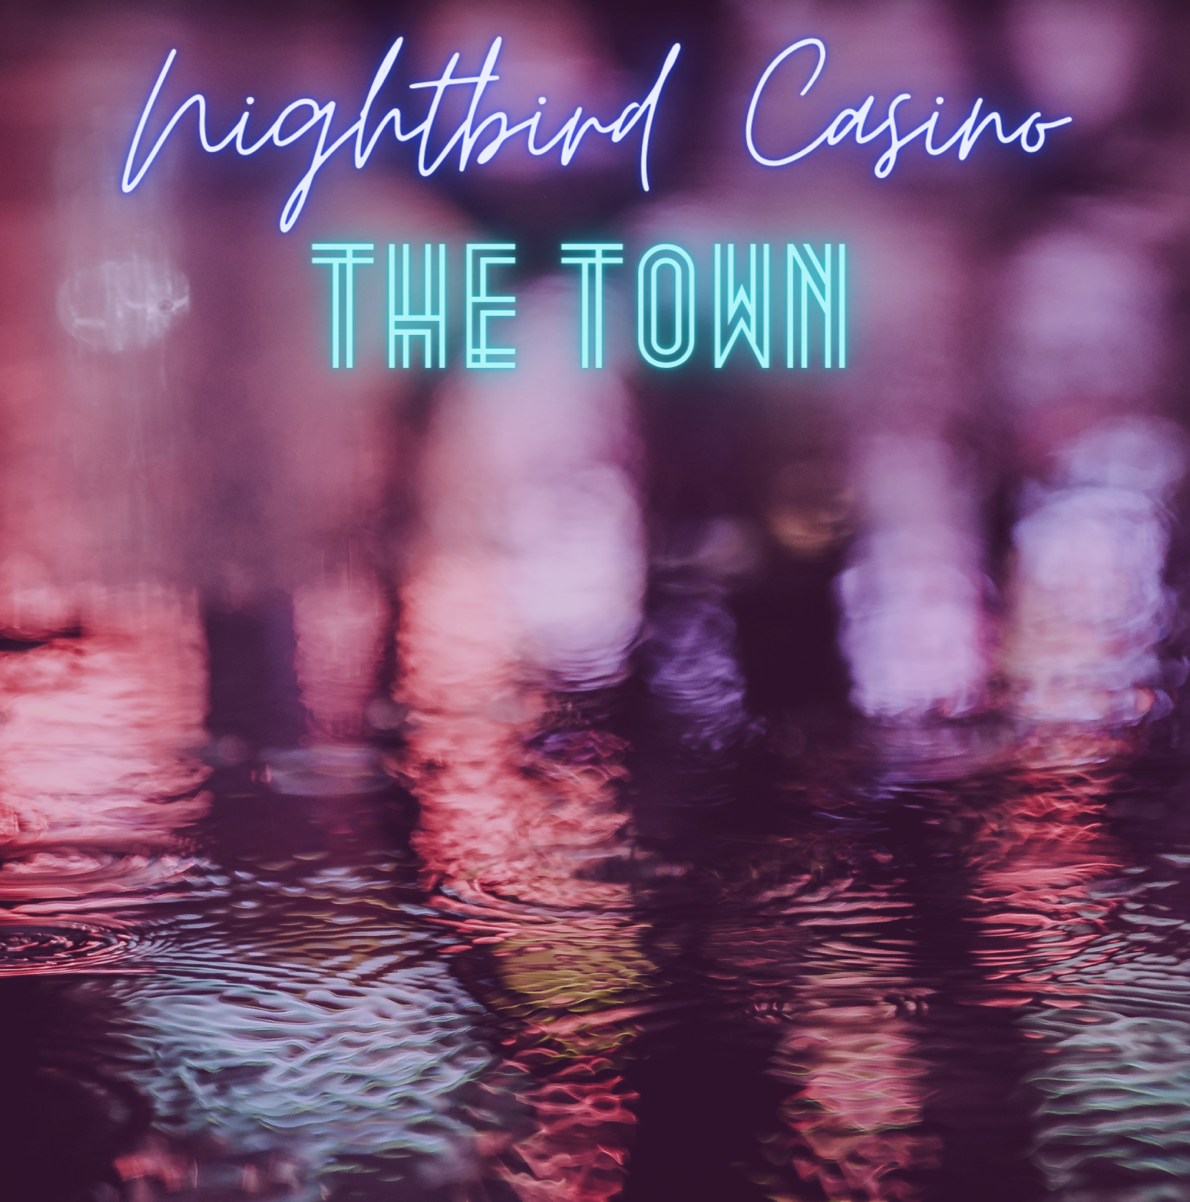 Nightbird Casino has released their hotly-anticipated sweetly psychotropic earworm, ‘The Town’.